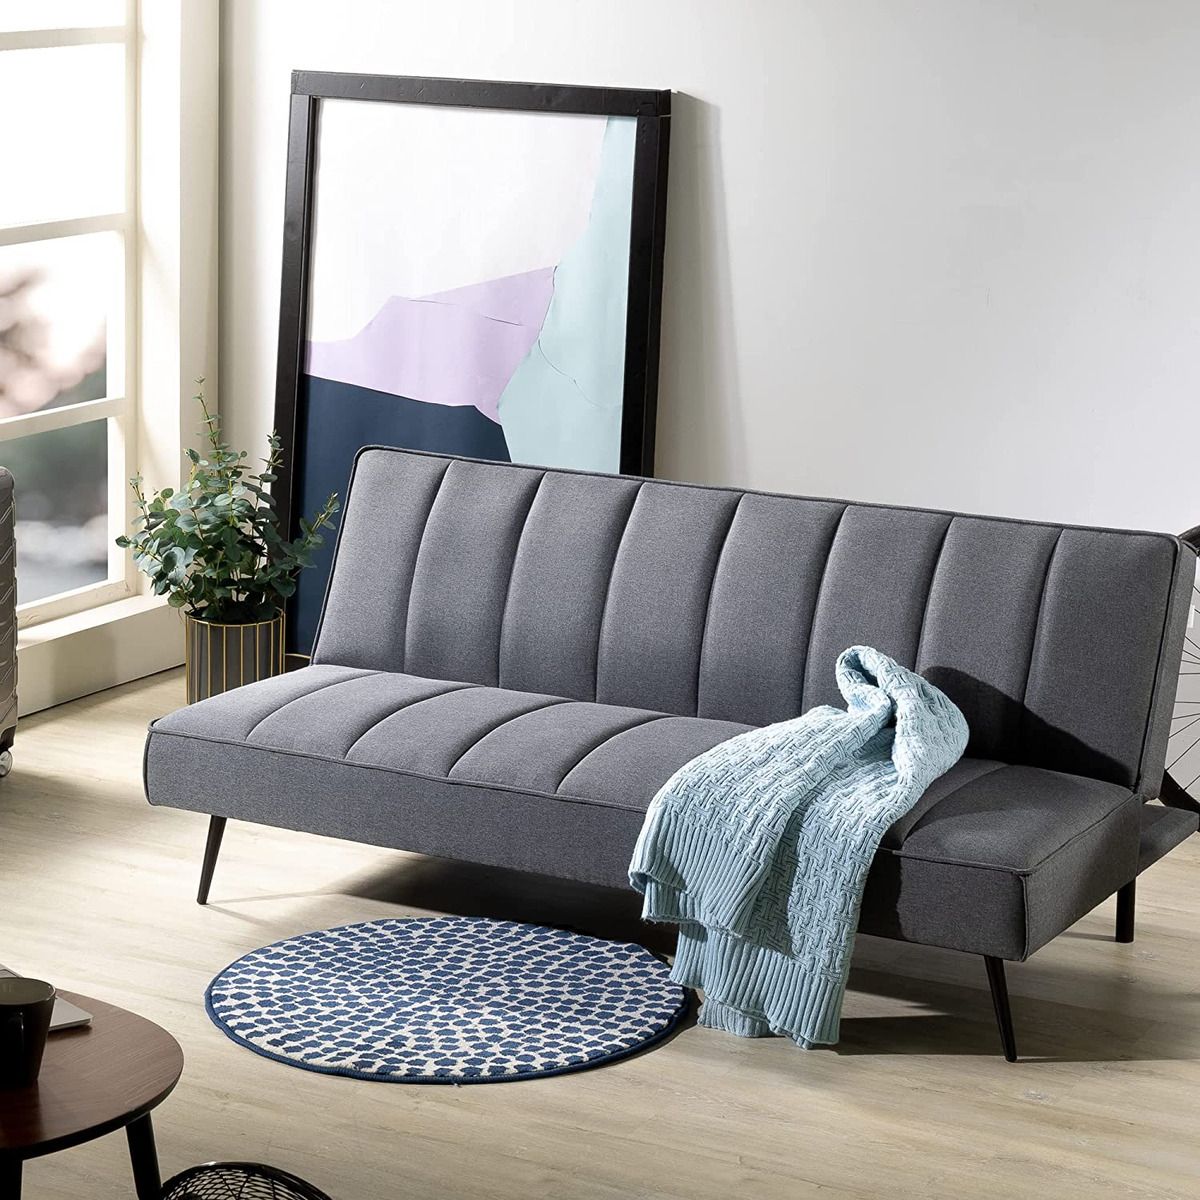 Quinn Sleeper Sofa / Convertible Sofa / Futon / 2 In 1 Folding Sofa Bed For  Apar | Ebay In 2 In 1 Foldable Sofas (View 10 of 15)